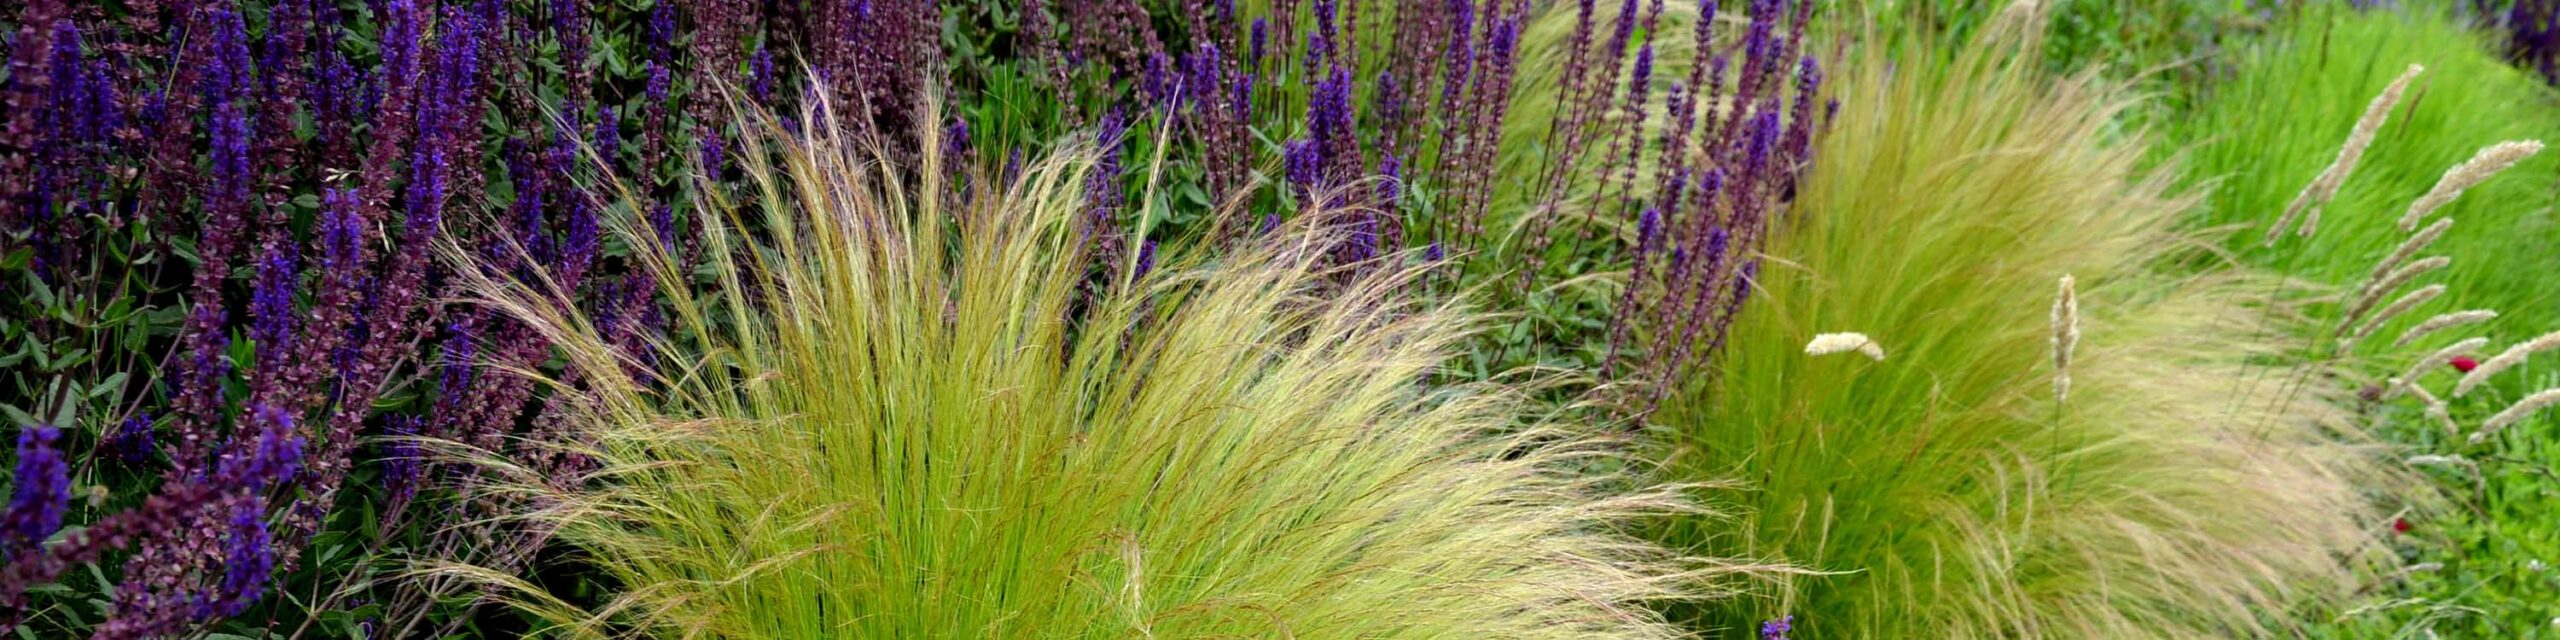 Cultivated ornamental grasses and sedges growing next to flowers.